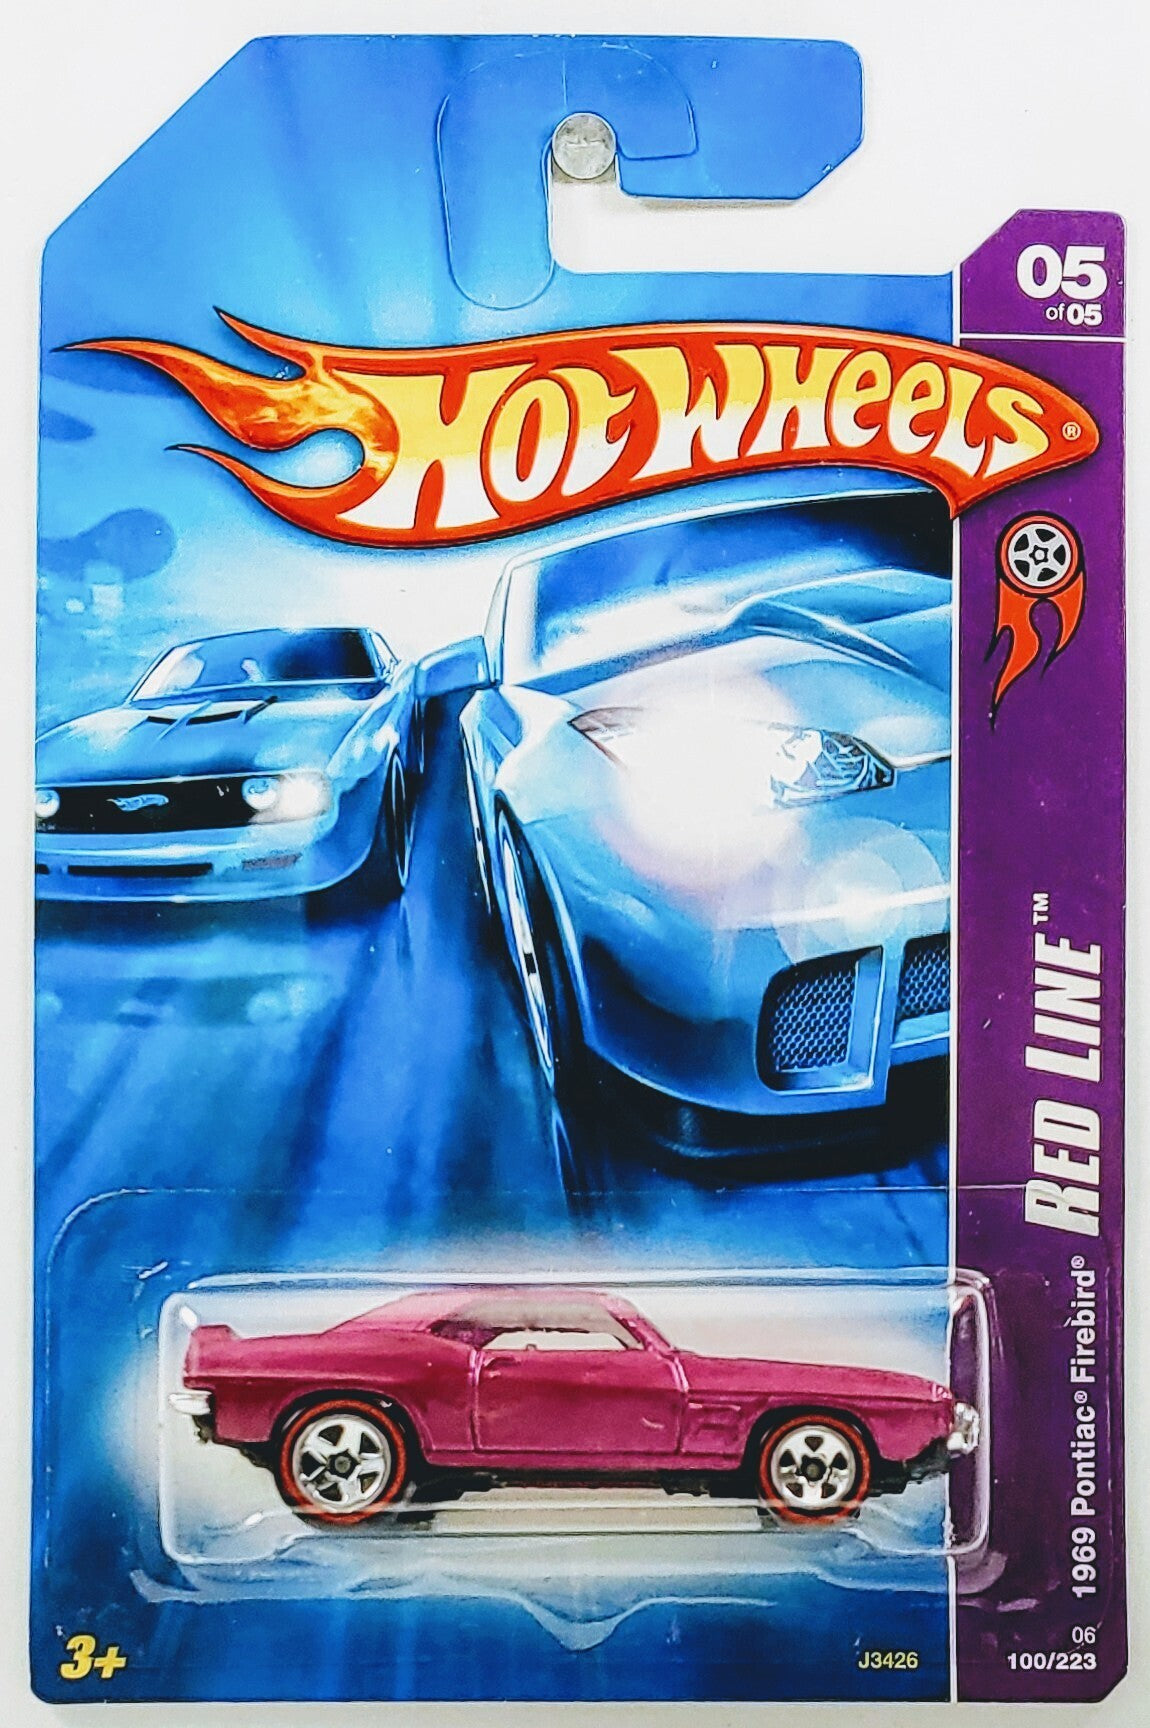 Hot Wheels 2006 - Collector # 100/223 - Red Line Series 5/5 - 1969 Pontiac Firebird - Magenta - Red Lines on 5 Spokes - USA